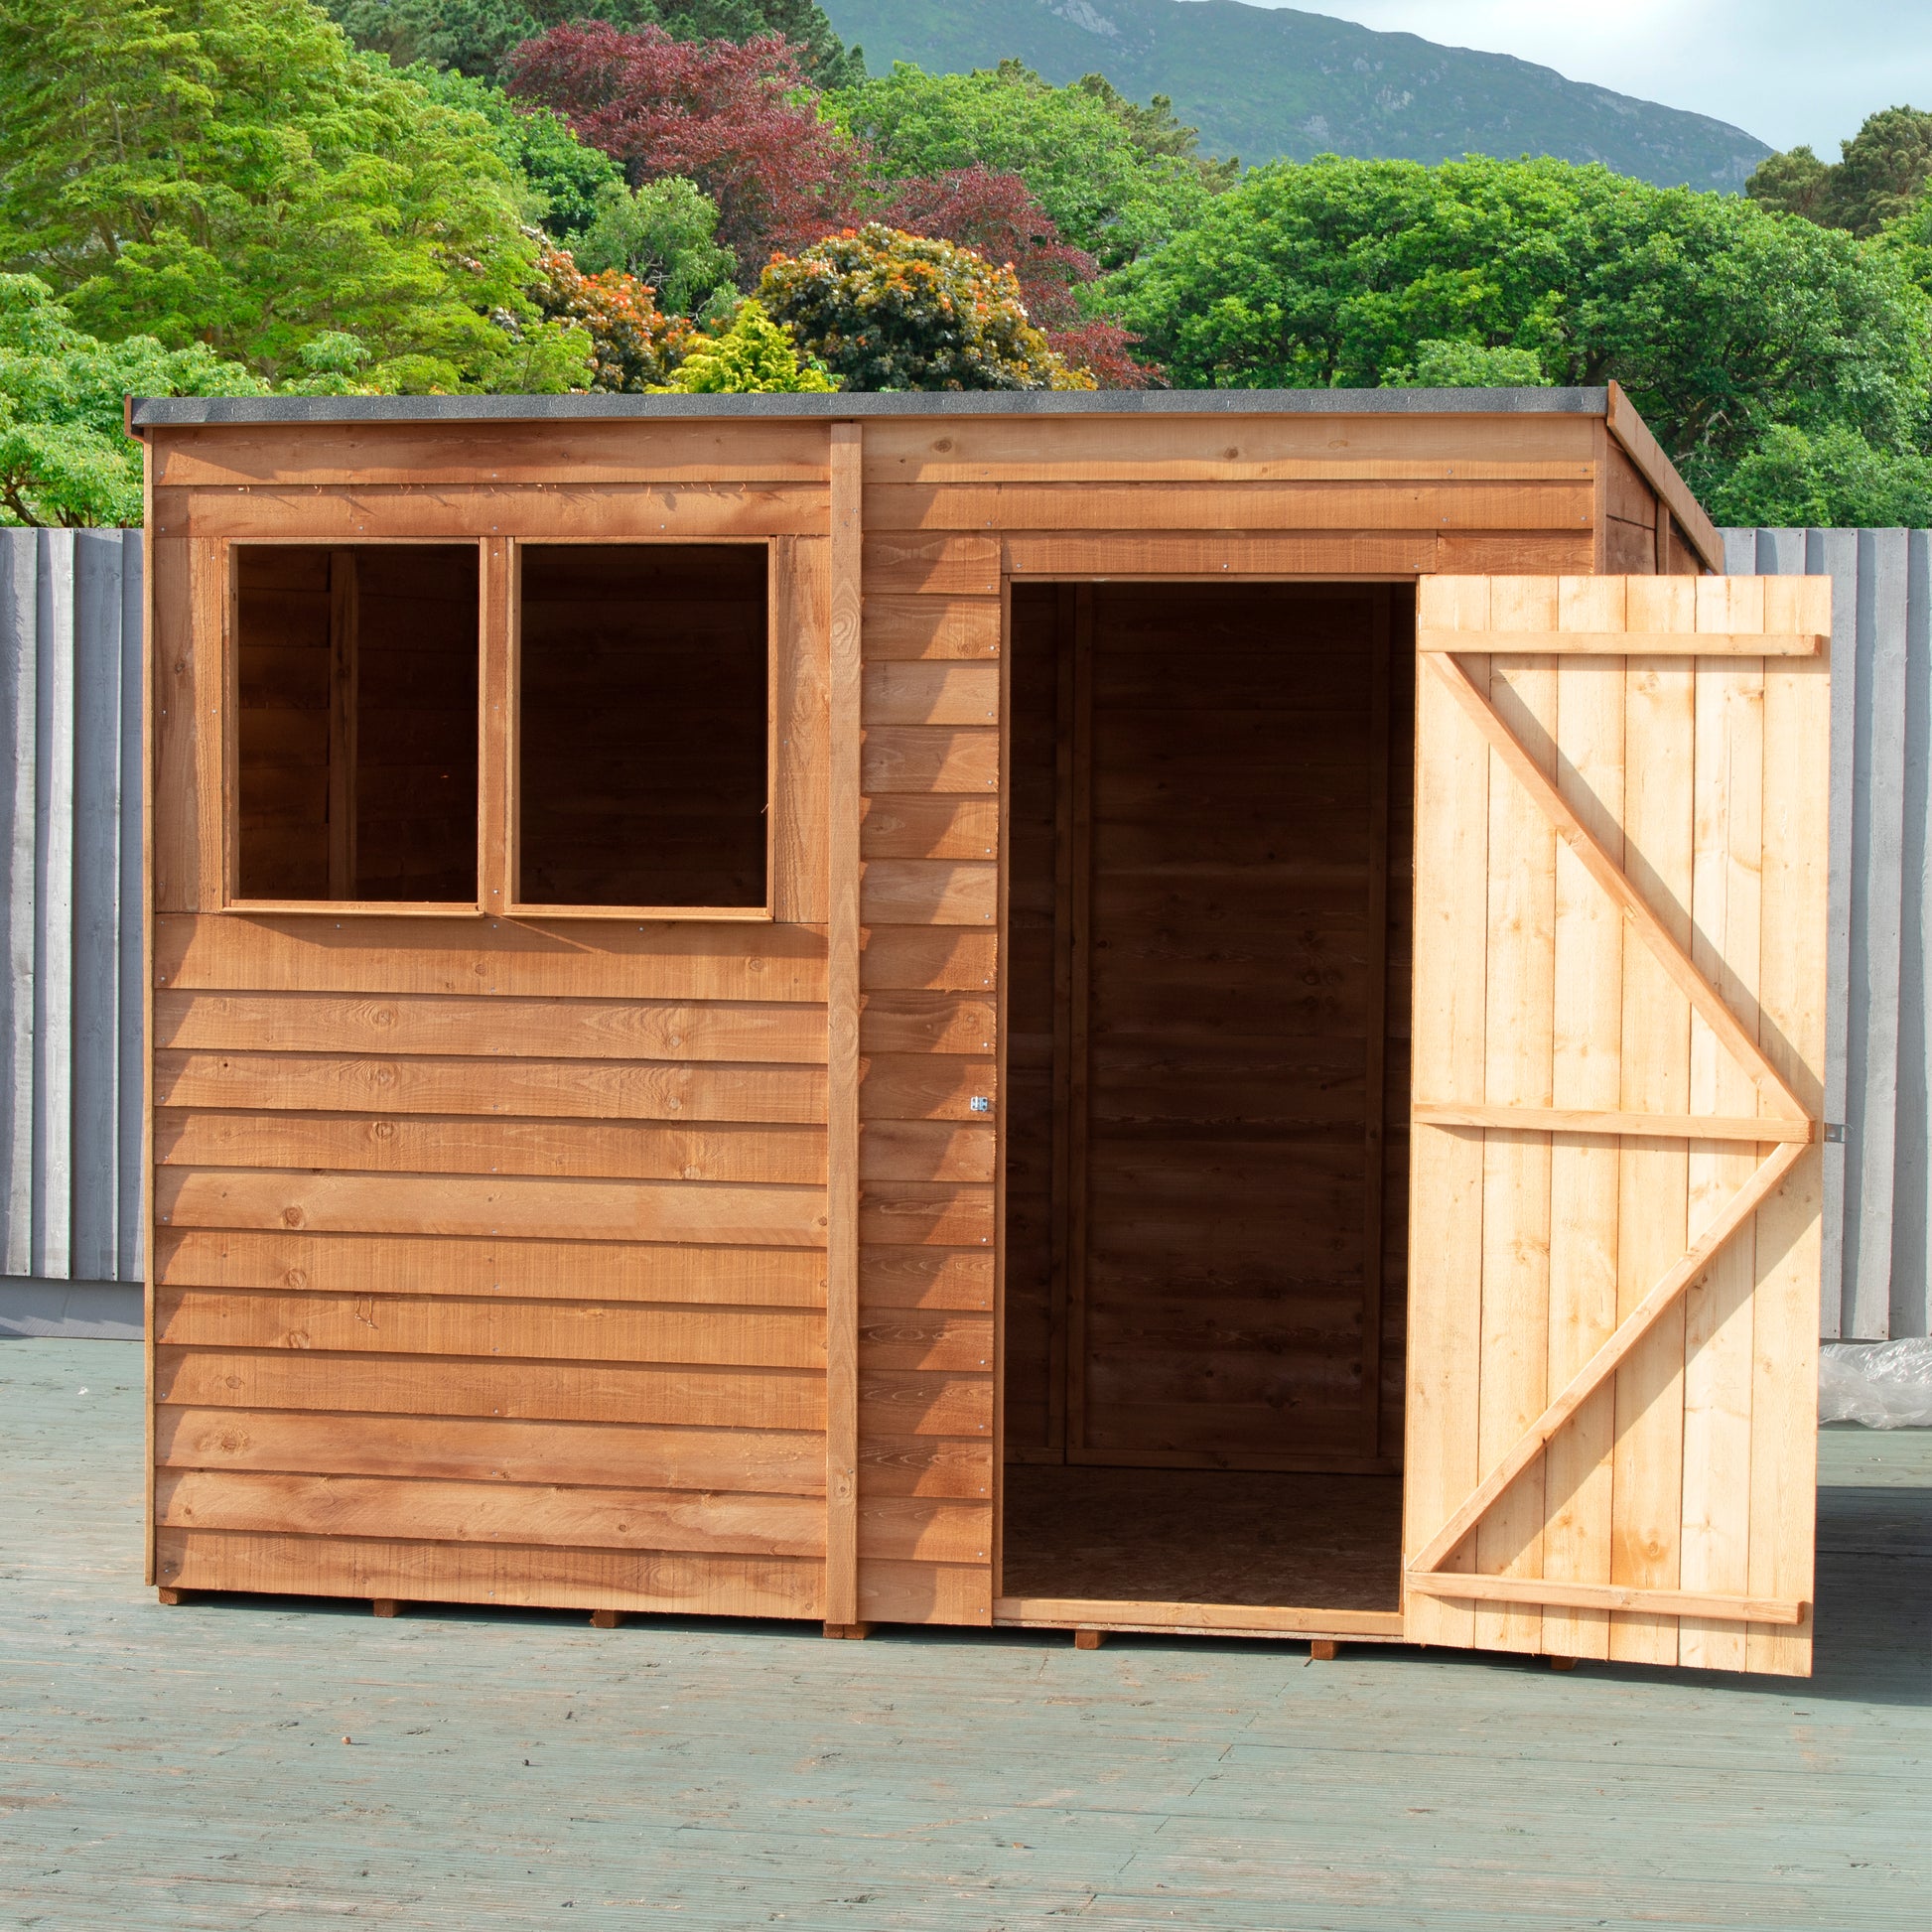 Shire 8 x 6 Dip Treated Overlap Shed Pent - Premium Garden